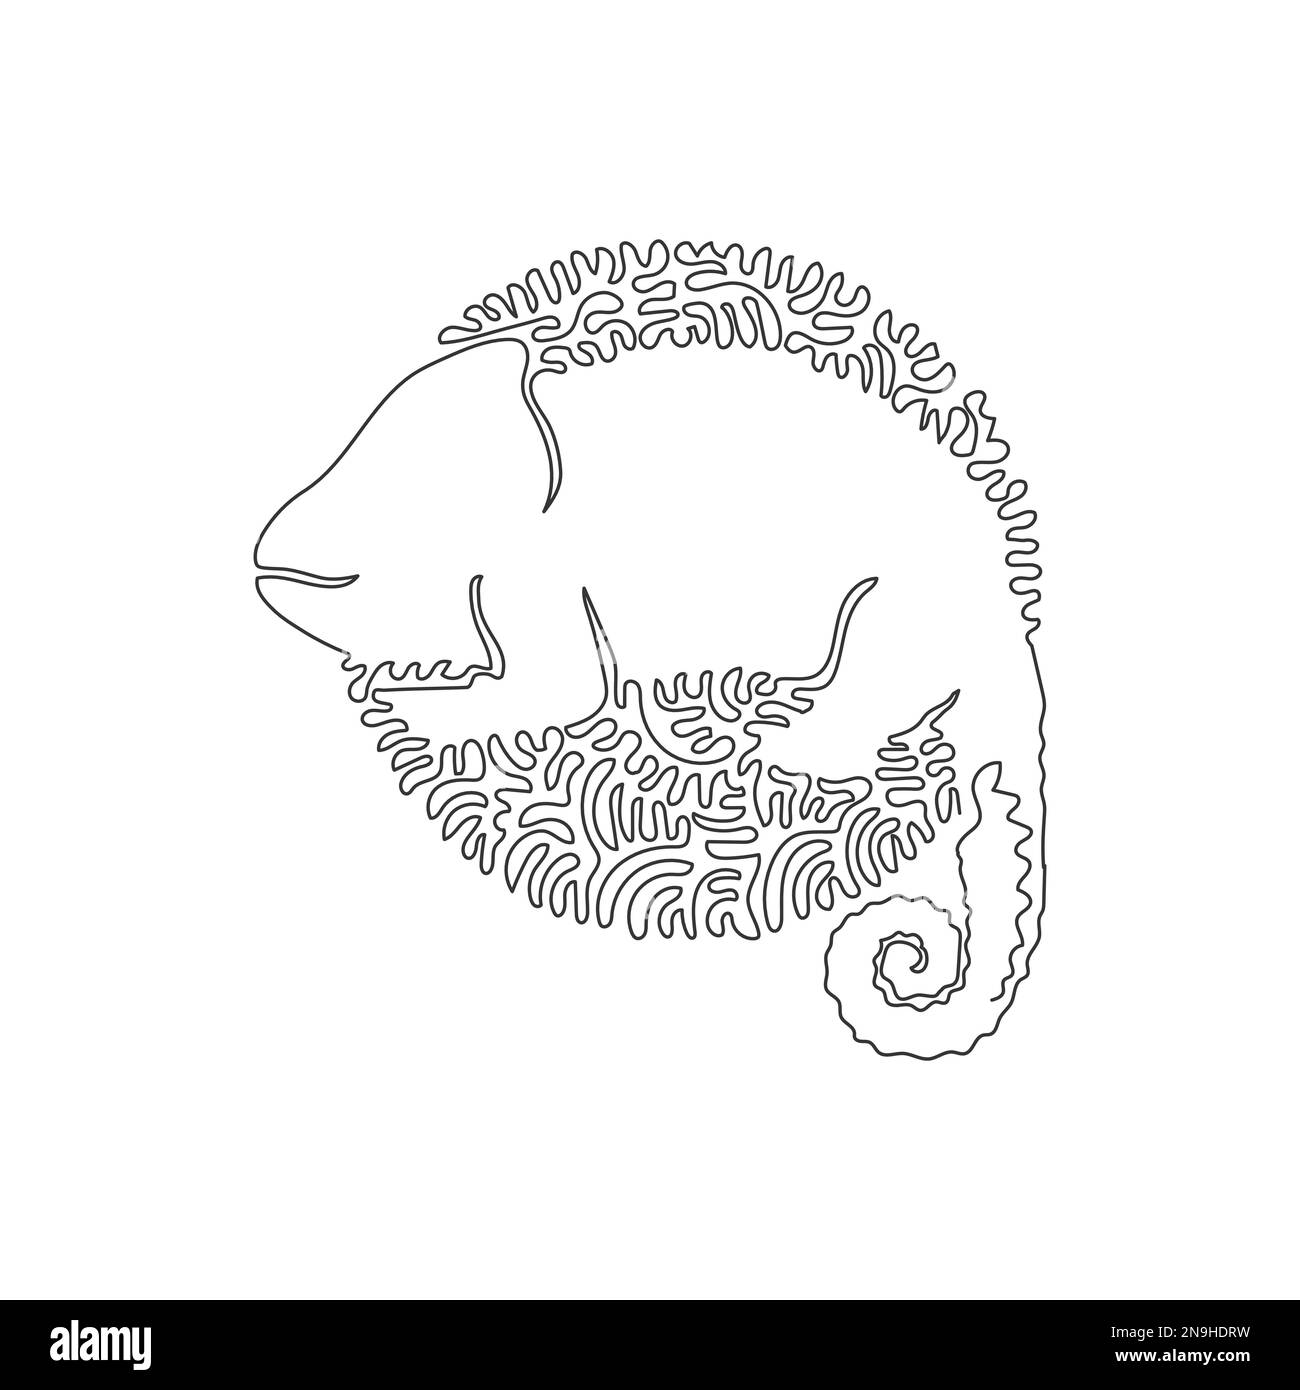 Single one curly line drawing of cute chameleon abstract art. Continuous line drawing graphic design vector illustration of friendly exotic pets Stock Vector